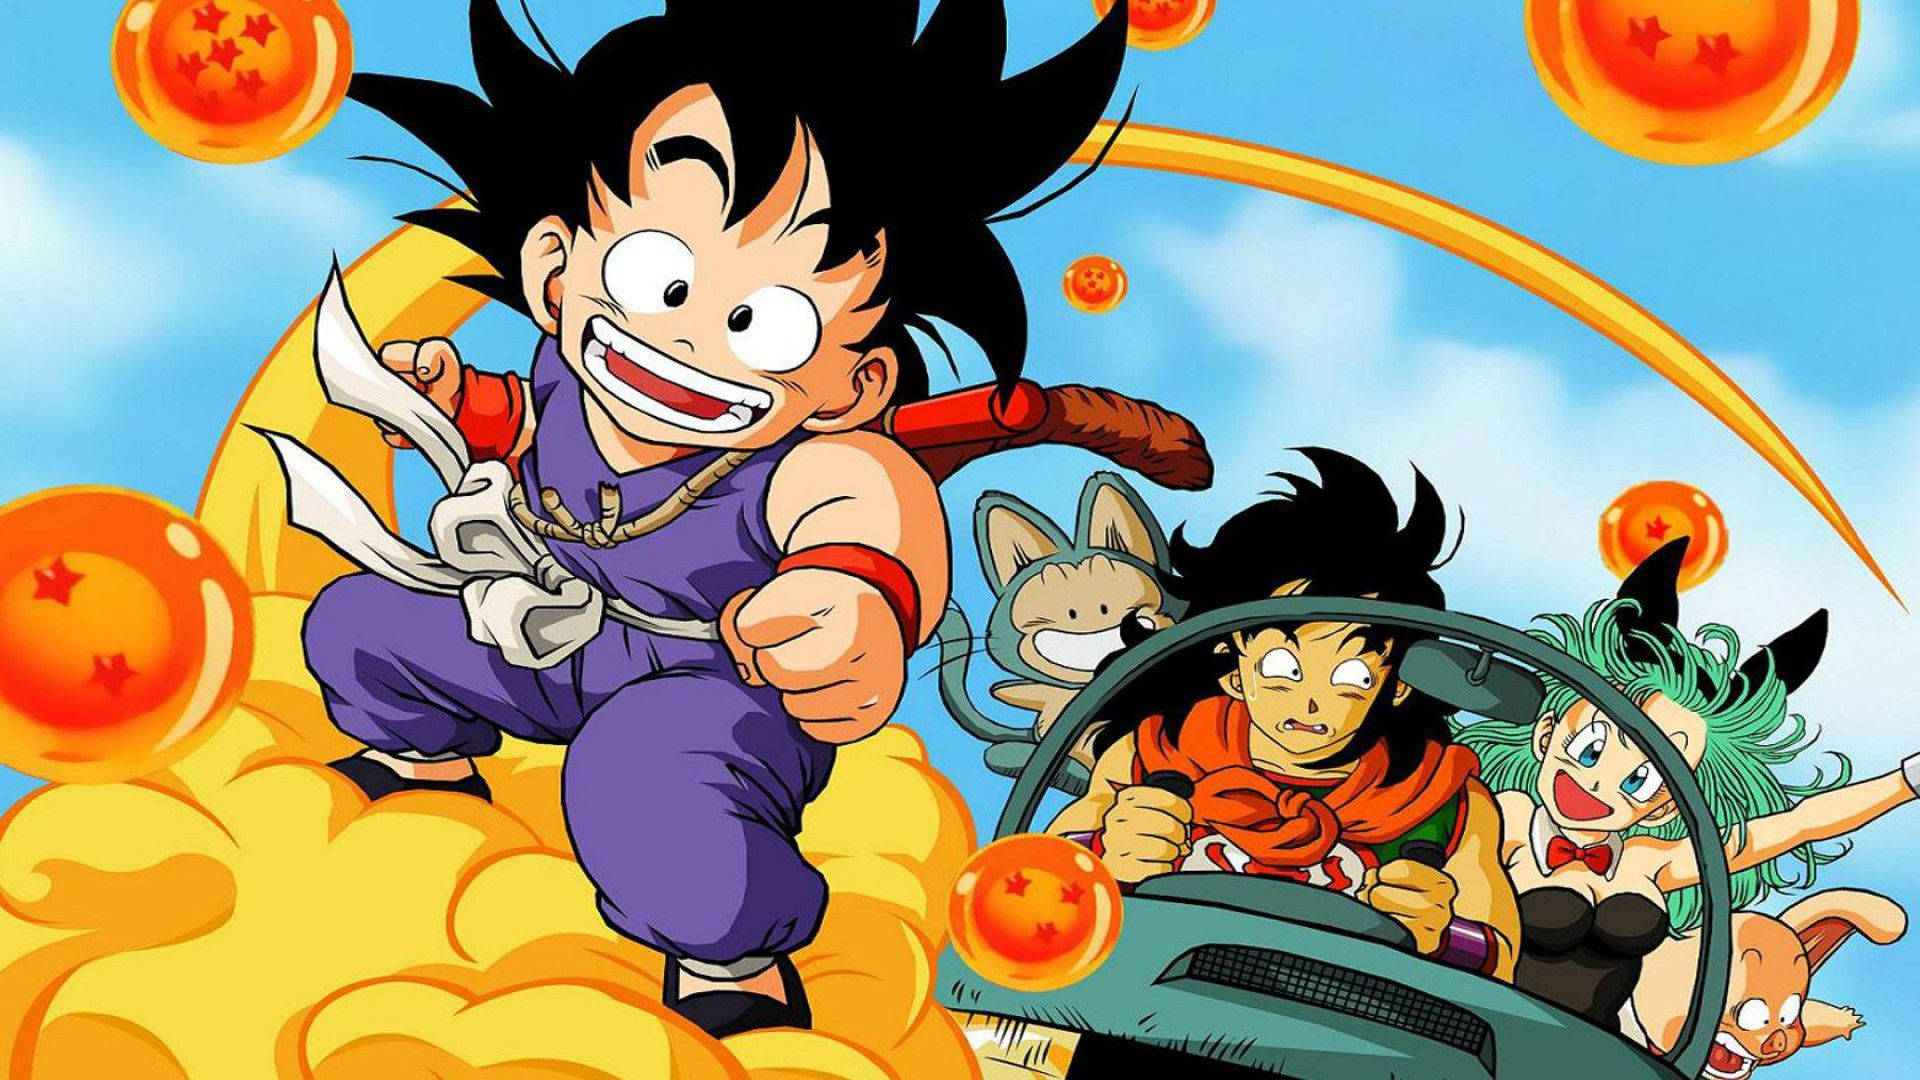 "Join us in the epic adventure of Dragon Ball!" Wallpaper